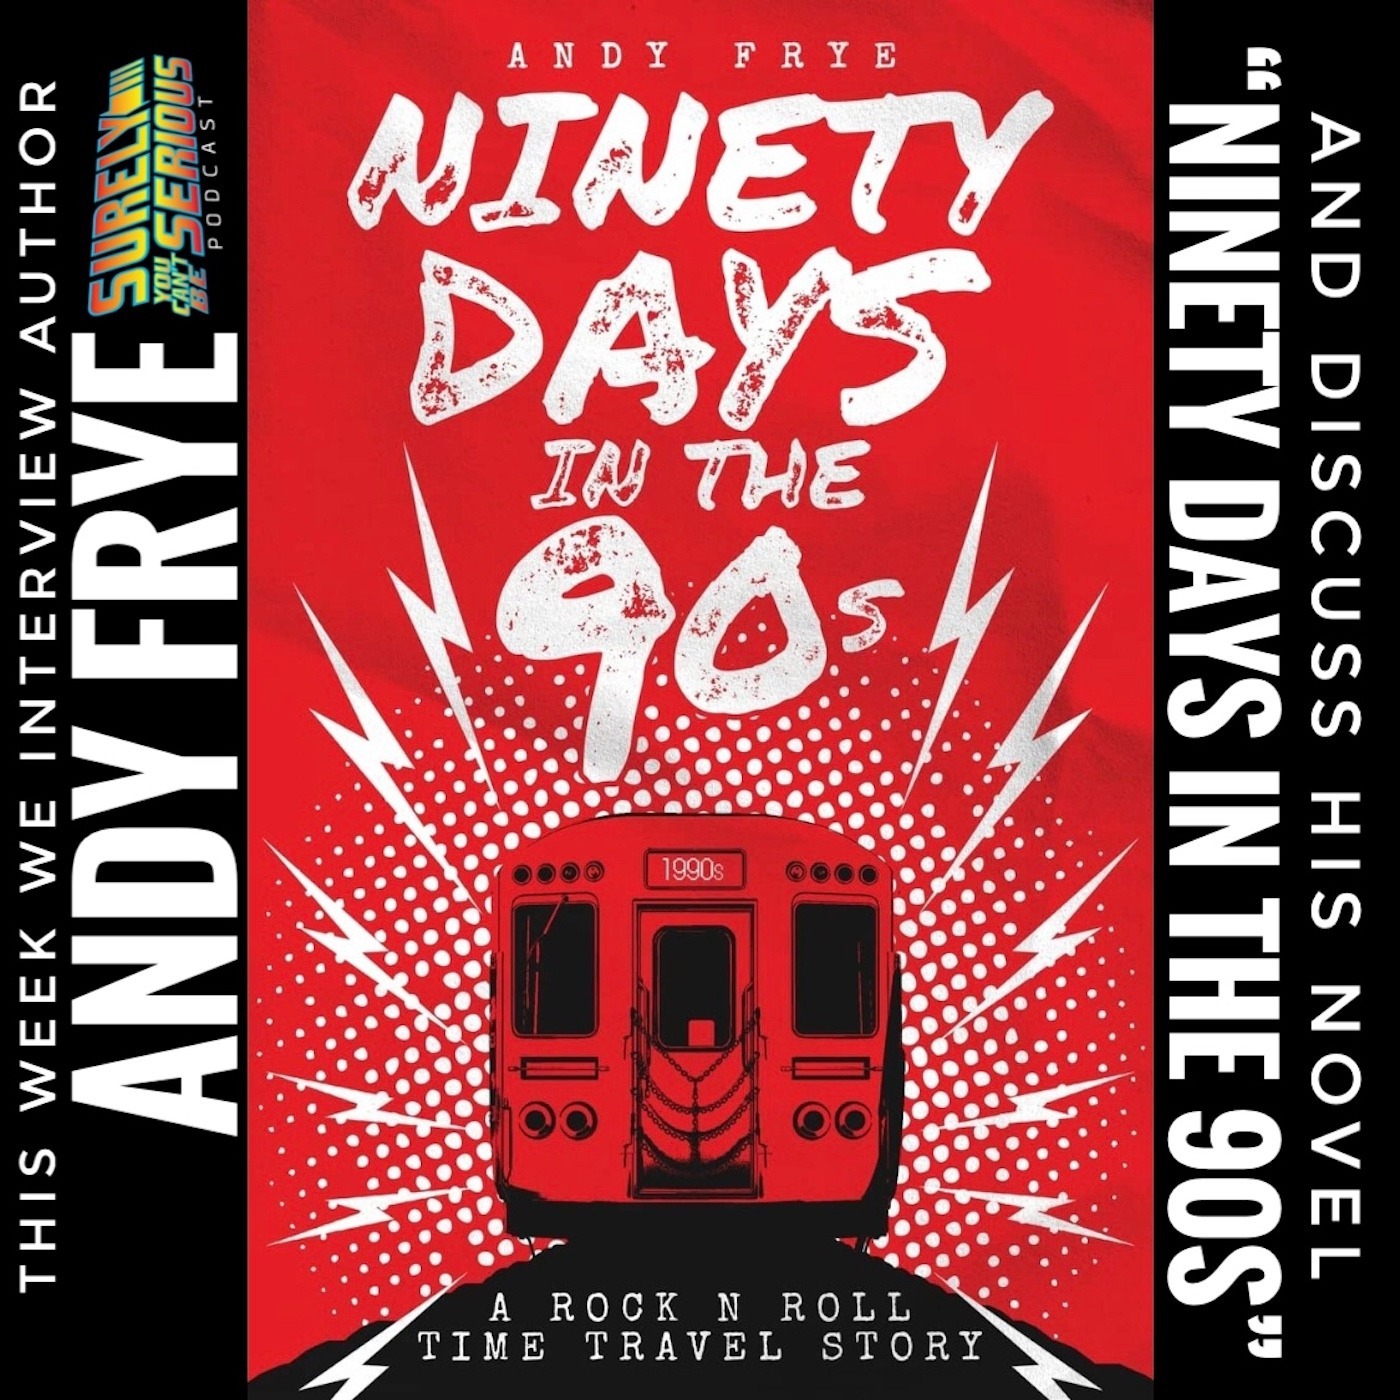 "Ninety Days in the 90s" (2022) with Andy Frye